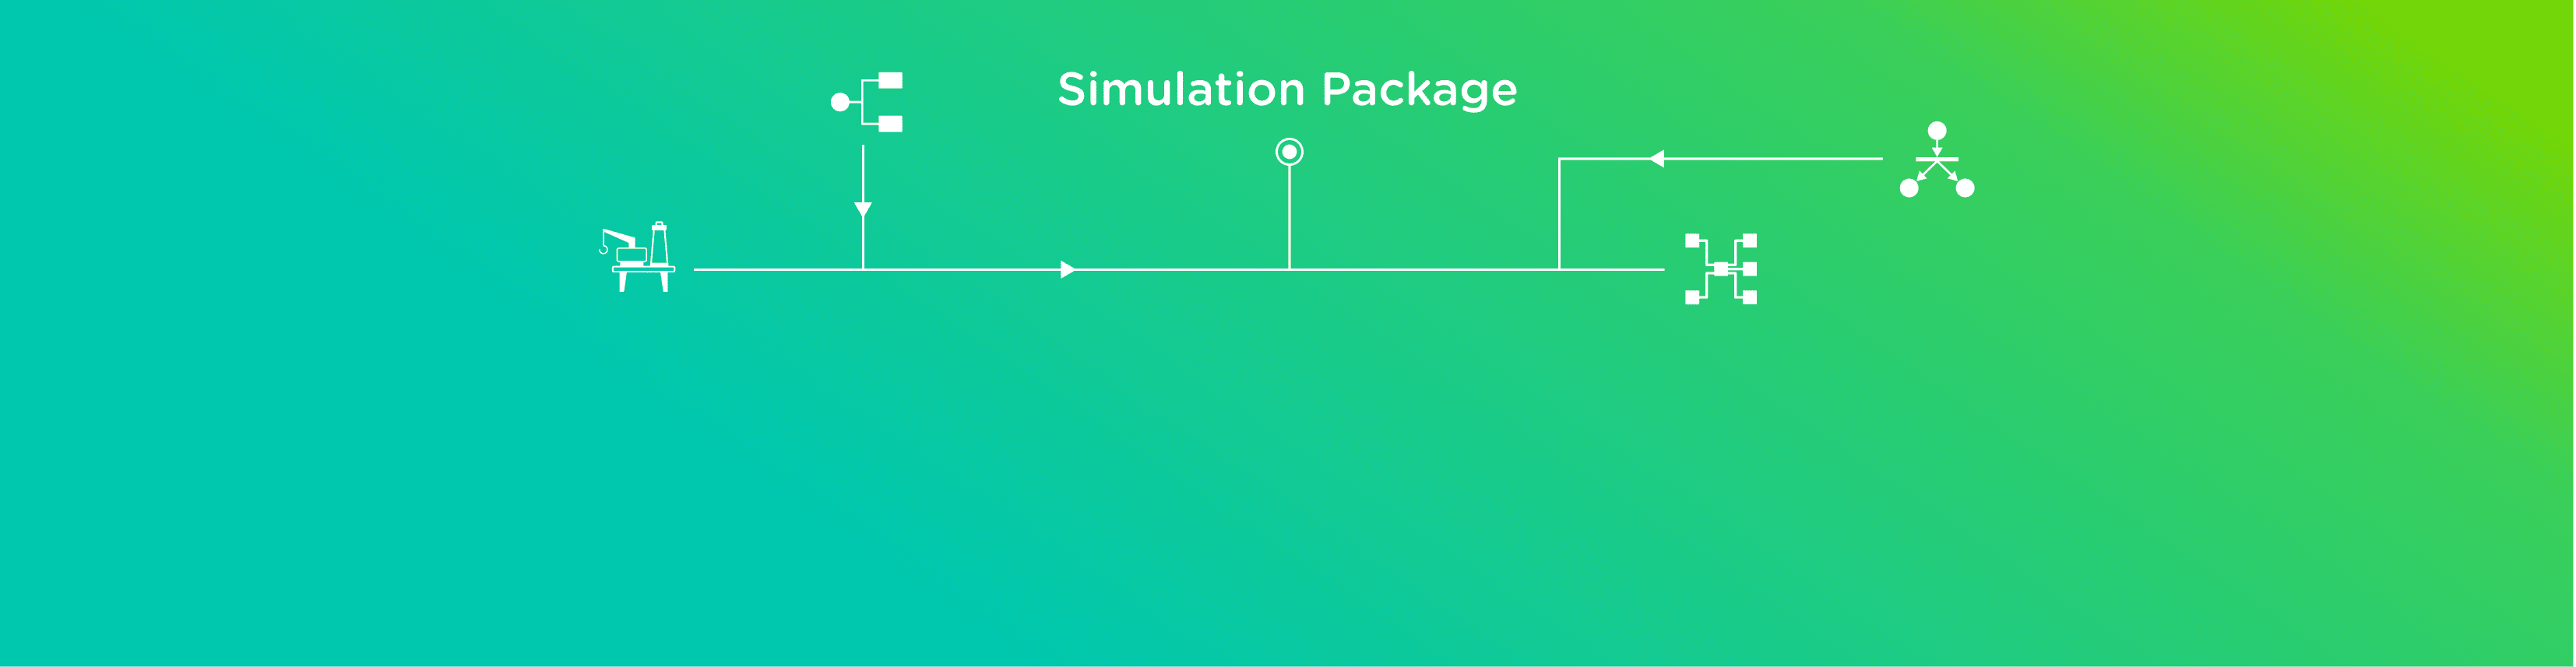 Simulation package 